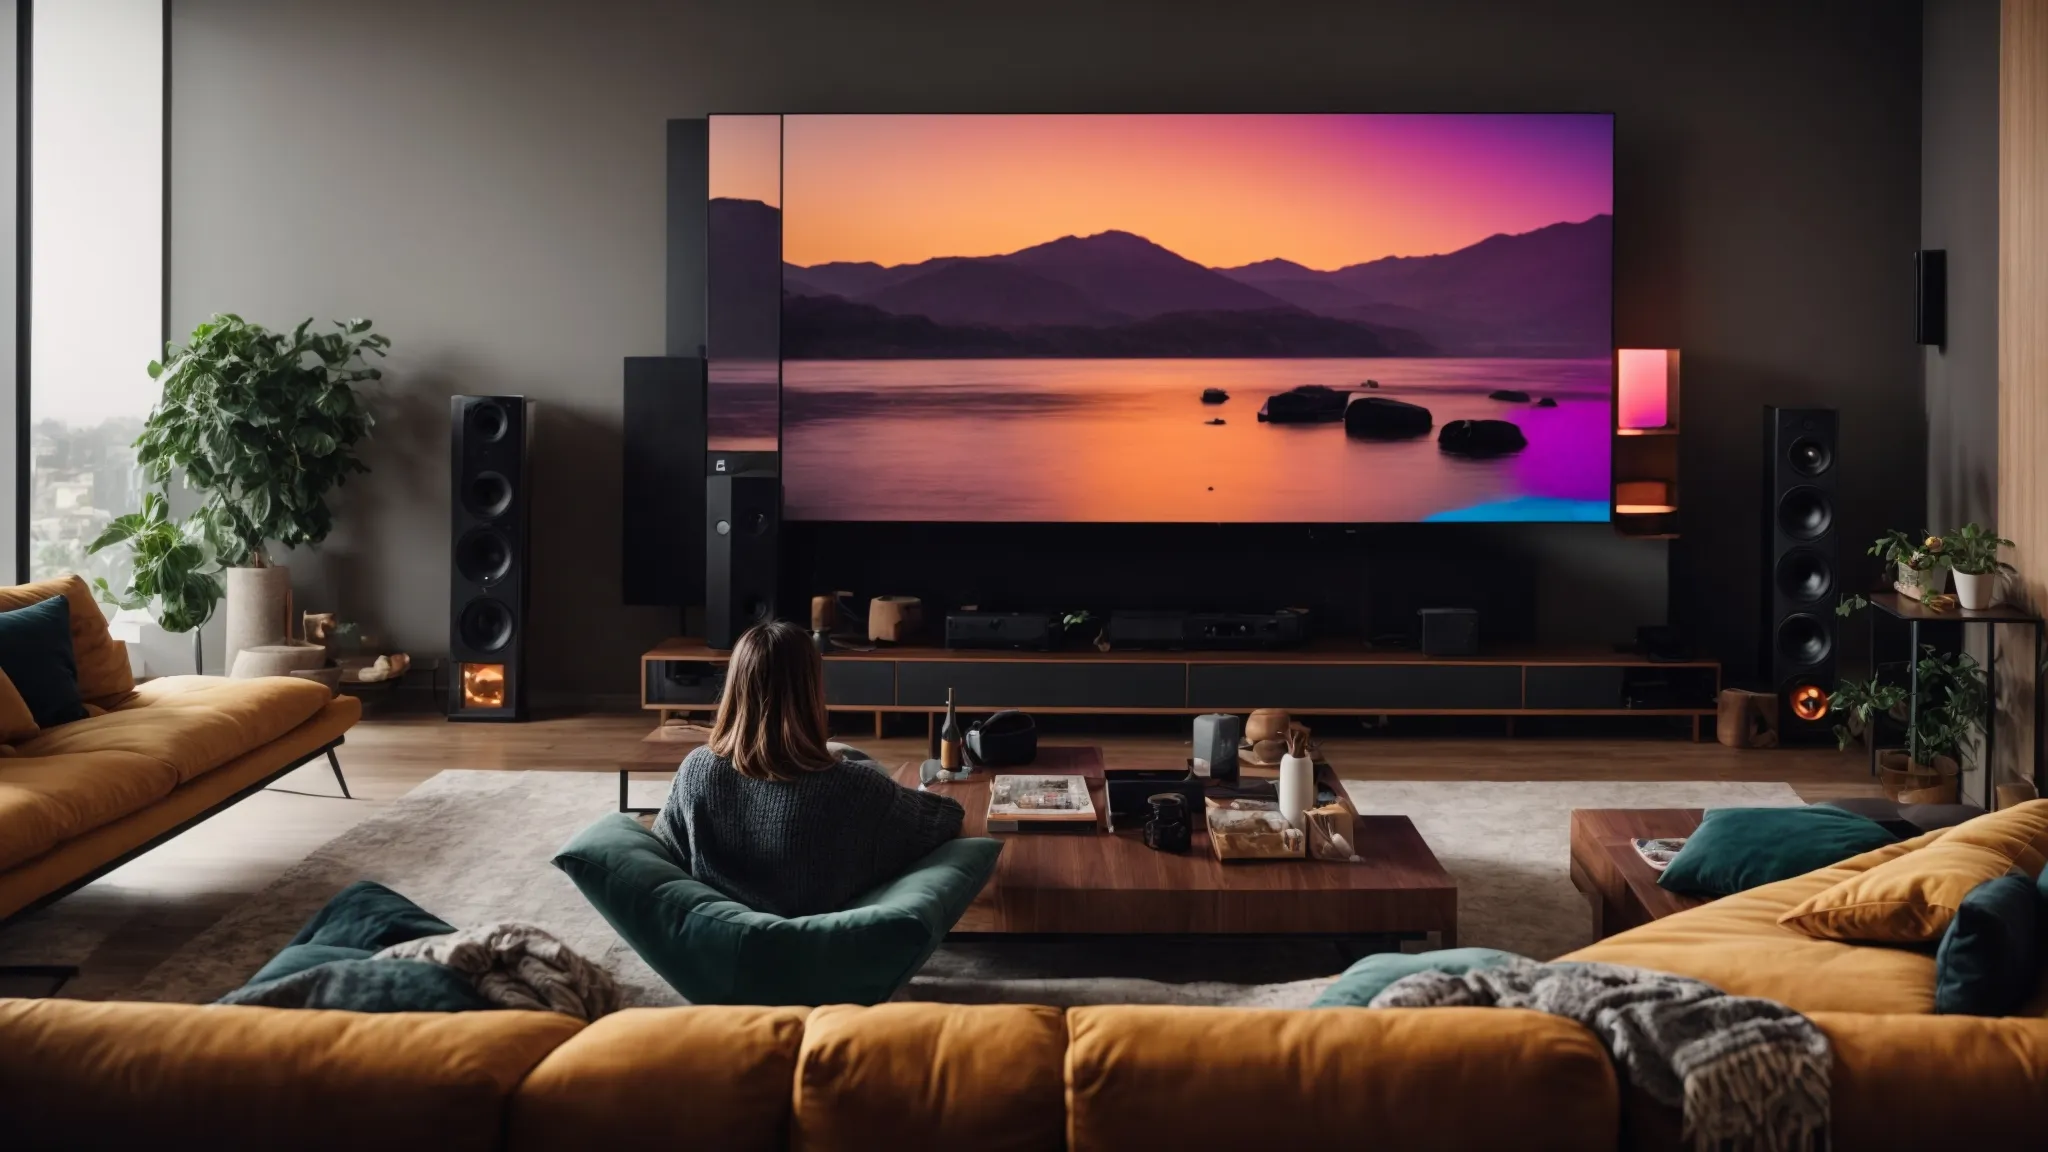 a person relaxes in a modern living room, immersed in a home theater setup with multiple screens displaying vibrant videos.